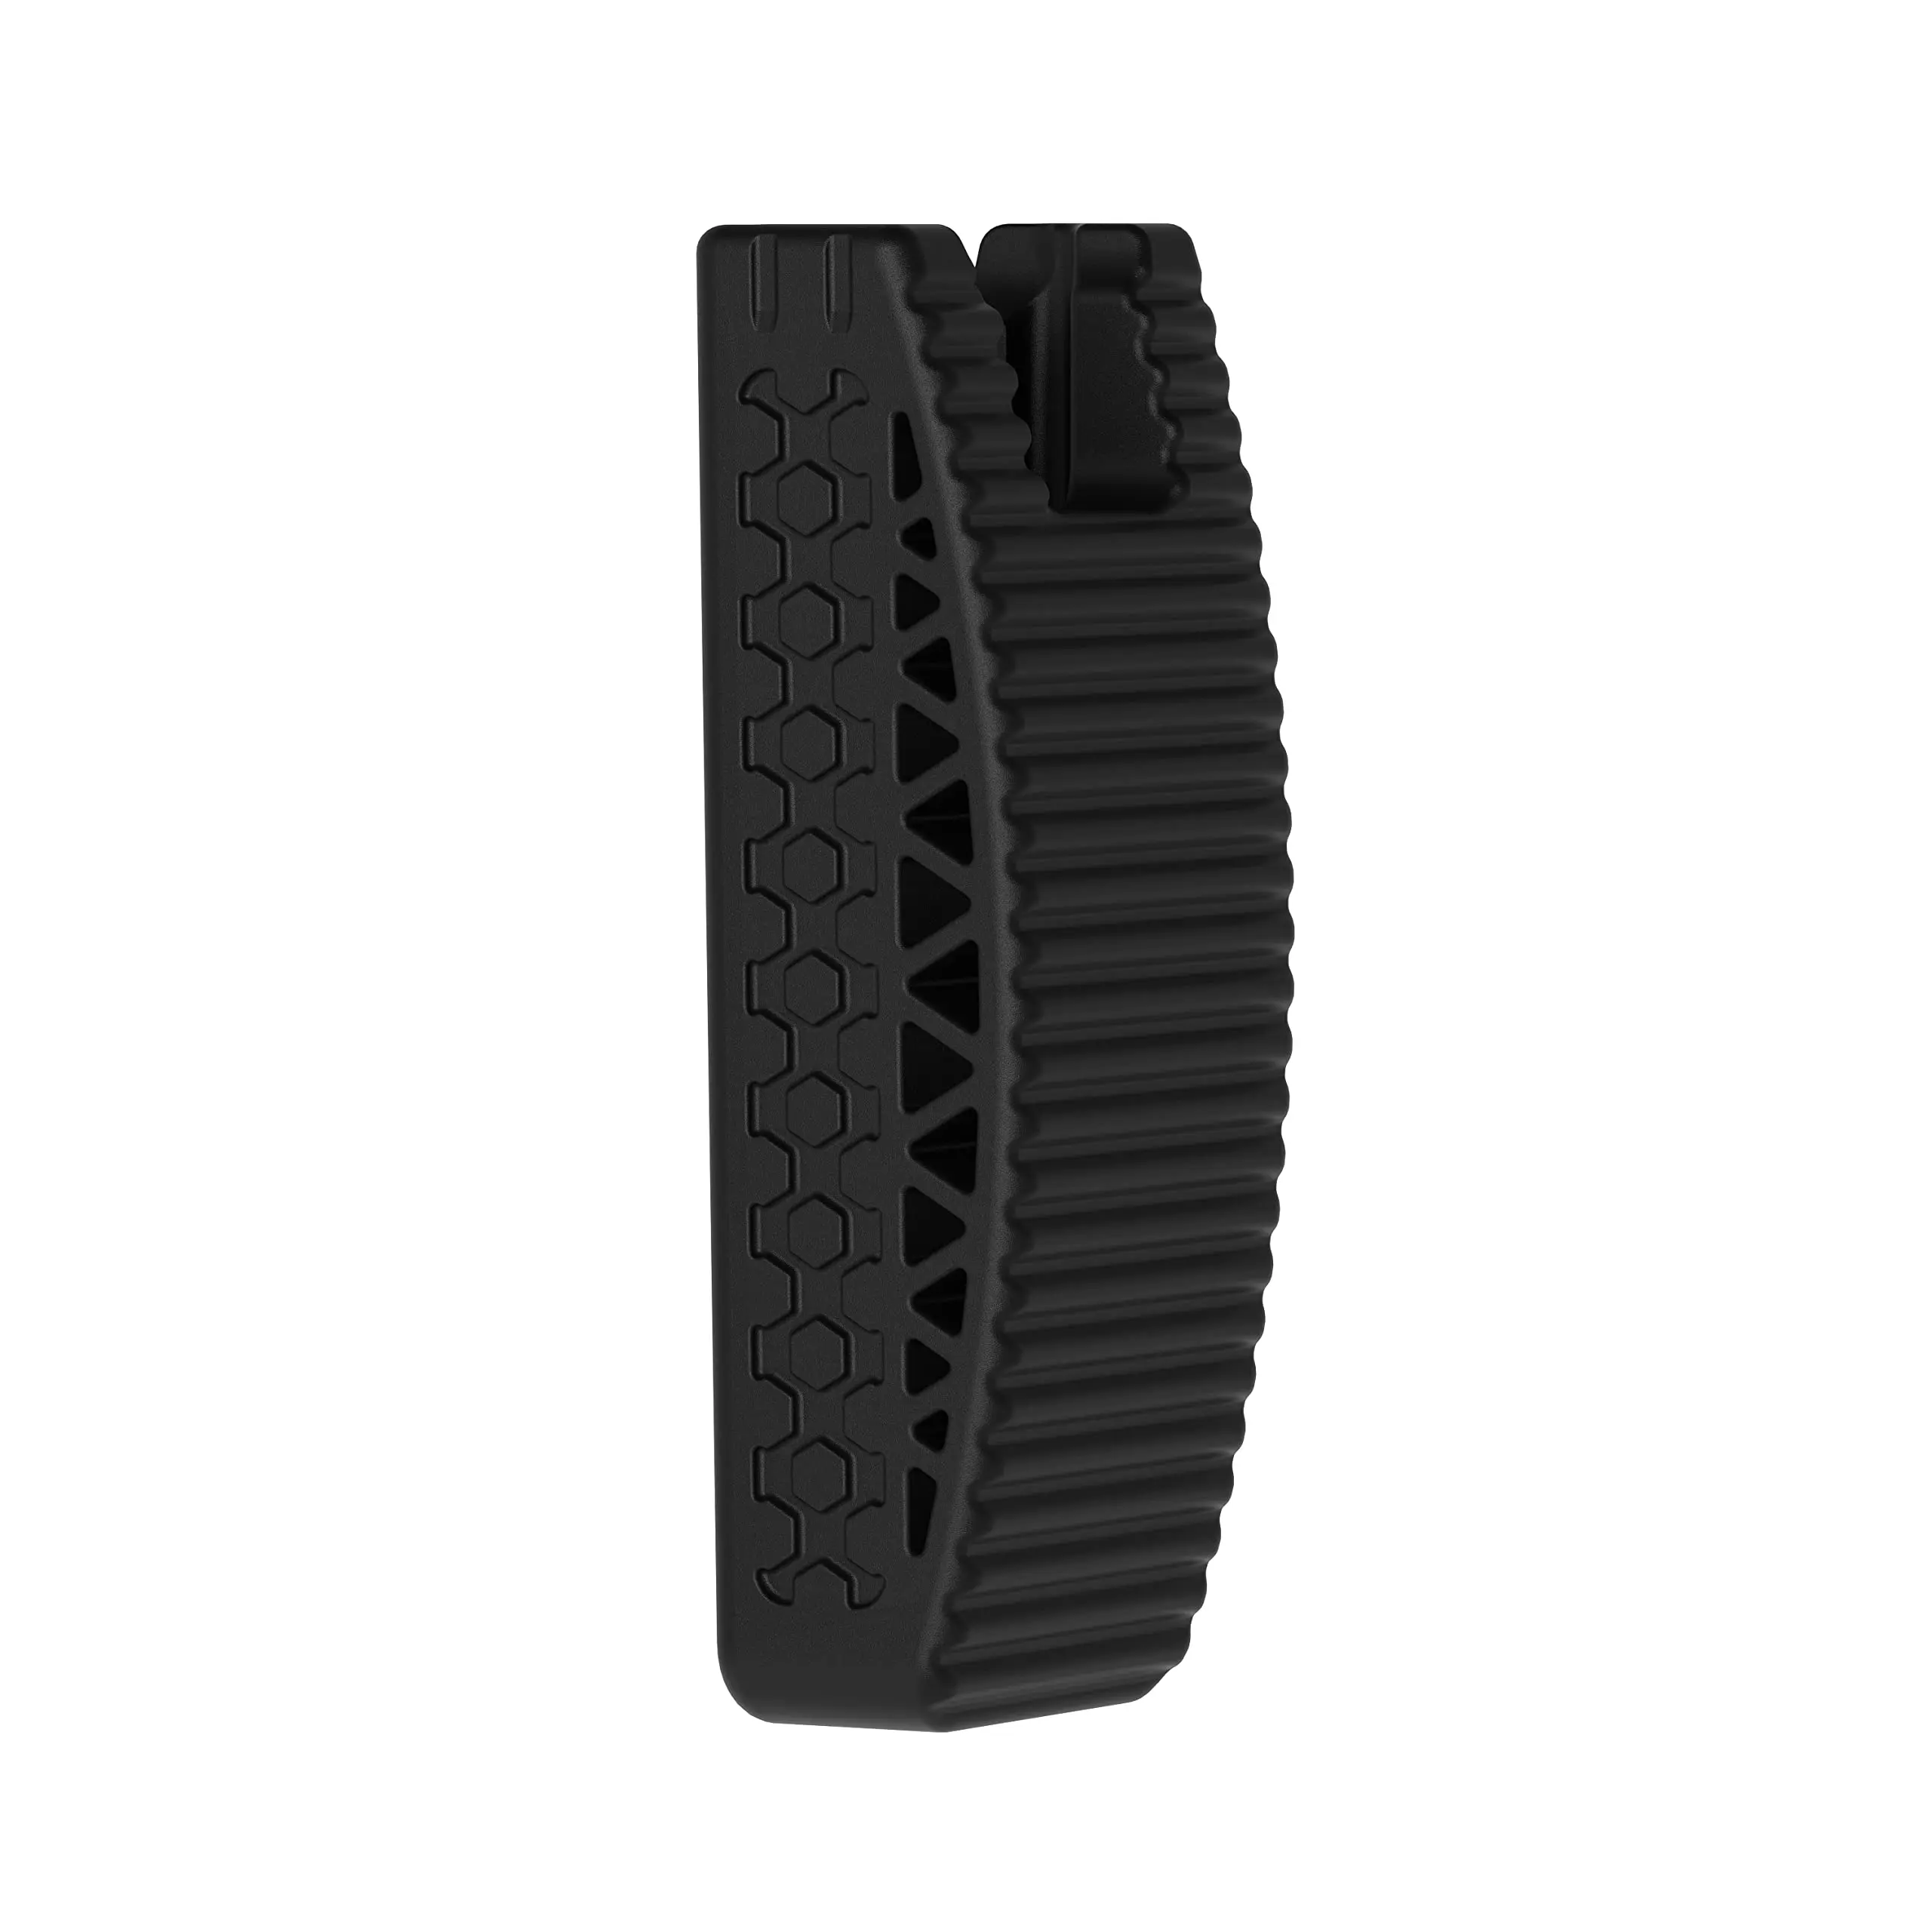 Pridefend Recoil Pad, Recoil Reducing Pad for SUB-2000G2 Rifle,Non-Slip Butt Pad,Recoil Pad for SUB2000G2 Accessories